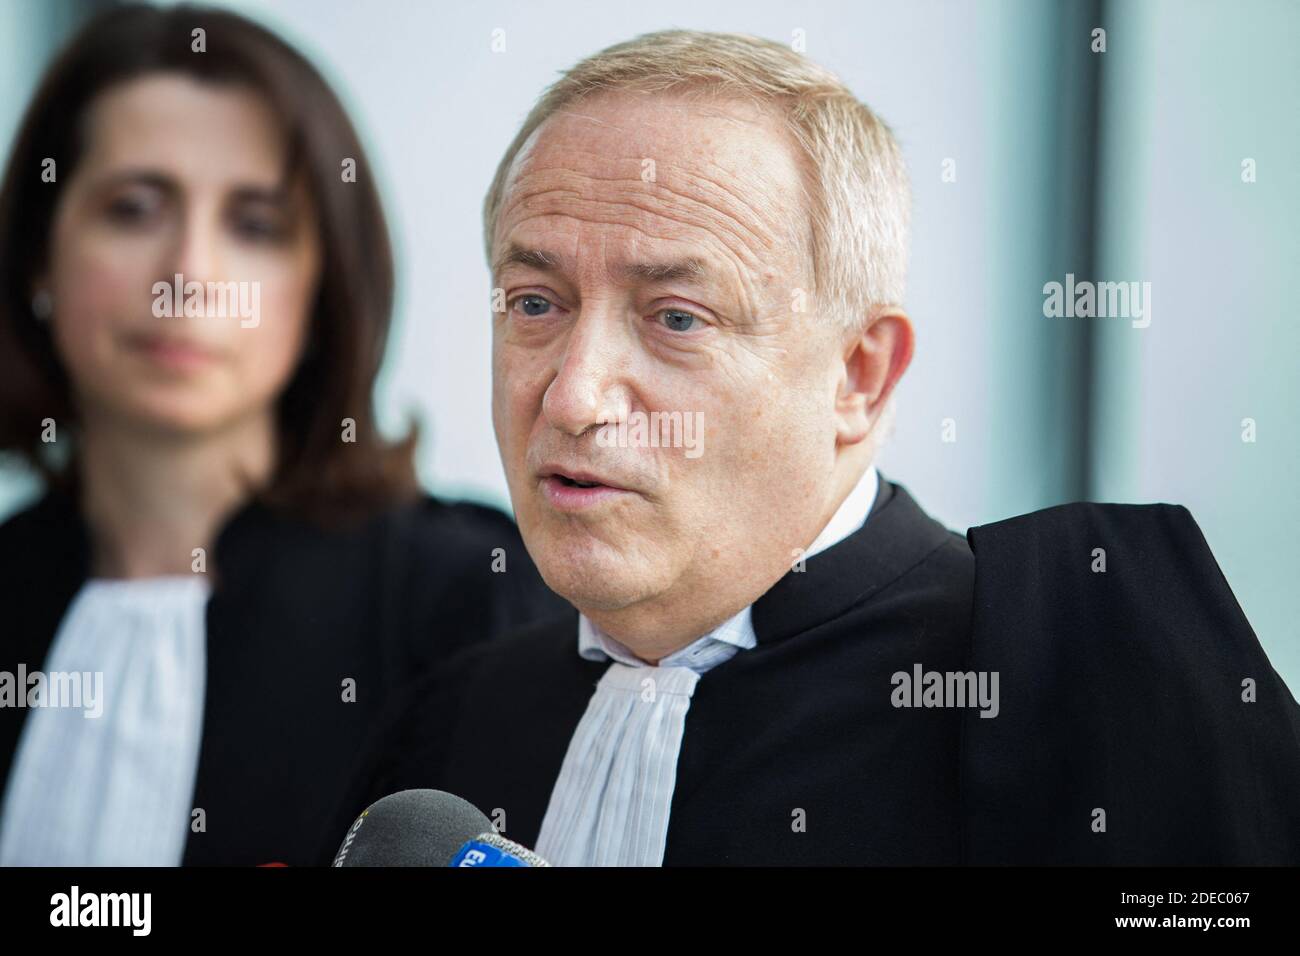 Lawyer for David Hallyday, son of late French singer Johnny Hallyday, Pierre -Jean Douvier arrives prior hearing at the Nanterre Regional courthouse,  near Paris, on March 29, 2019 in the case opposing the